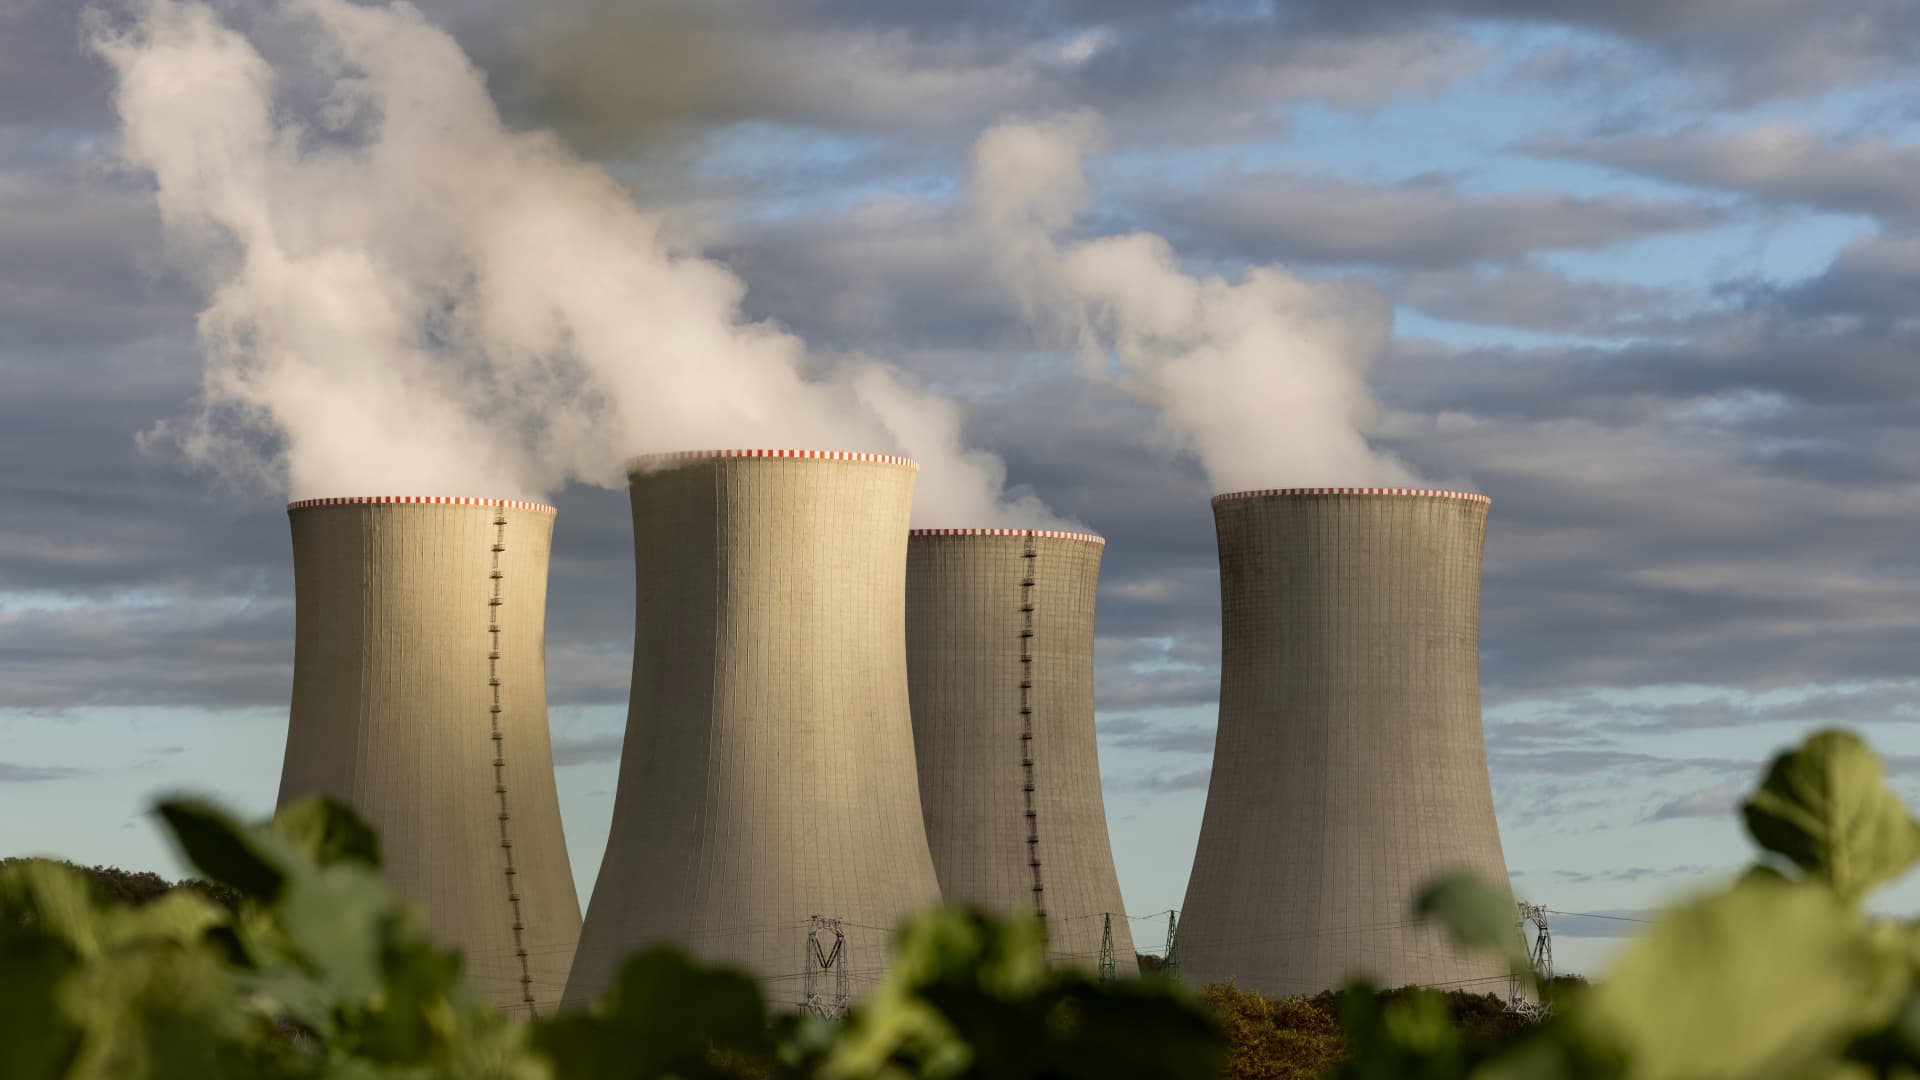 Nuclear's uncertain role in the shift away from fossil fuels is seen as critical and very contentious